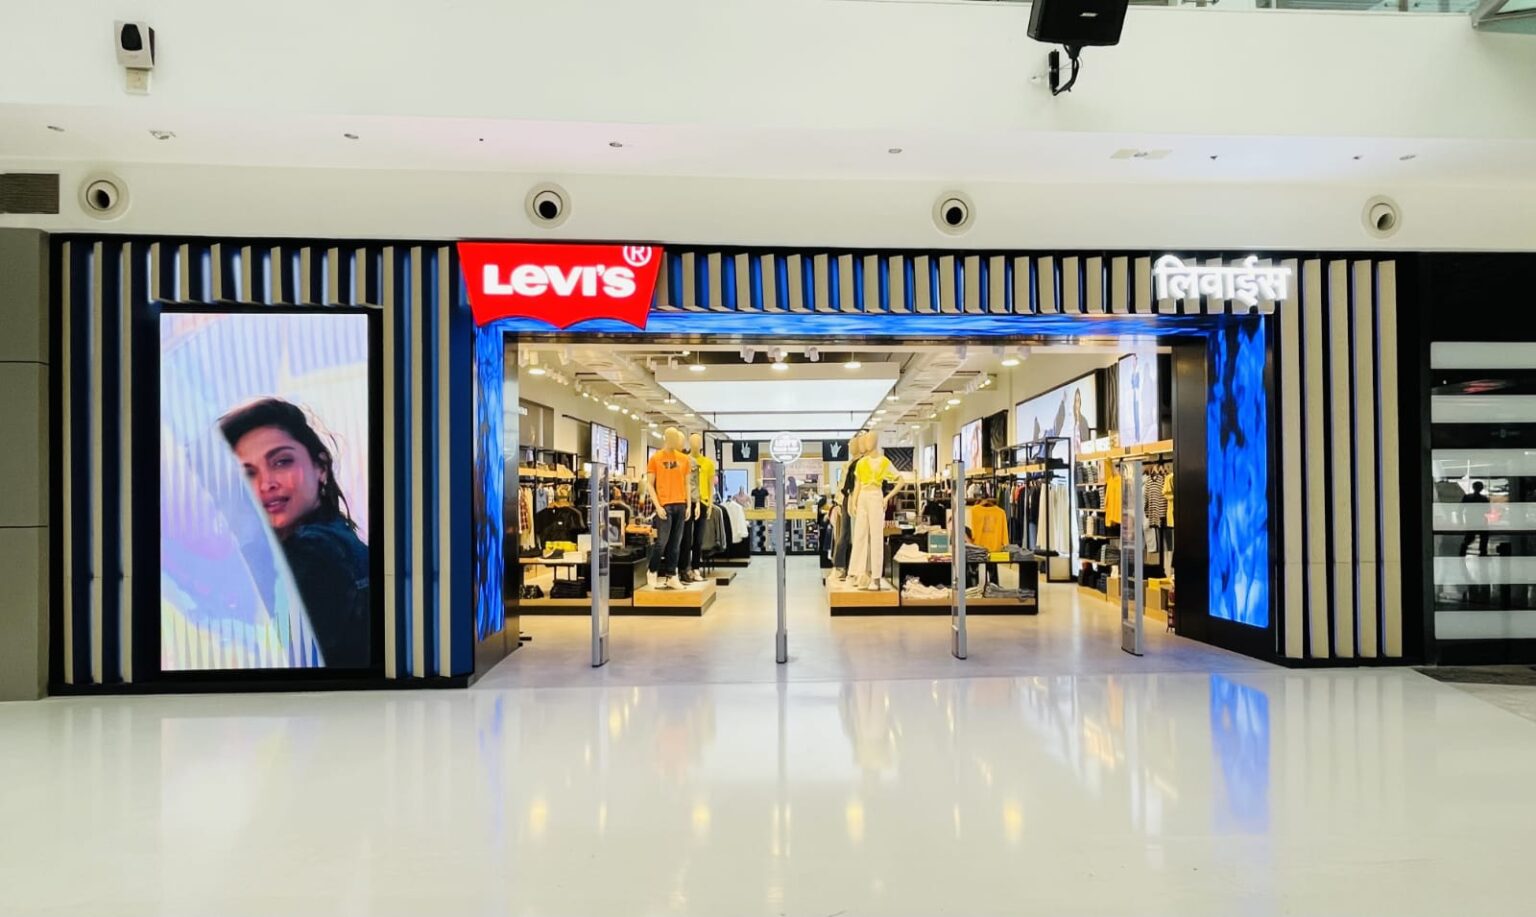 Levi’s® largest store opened in a mall space in India | Global Prime News